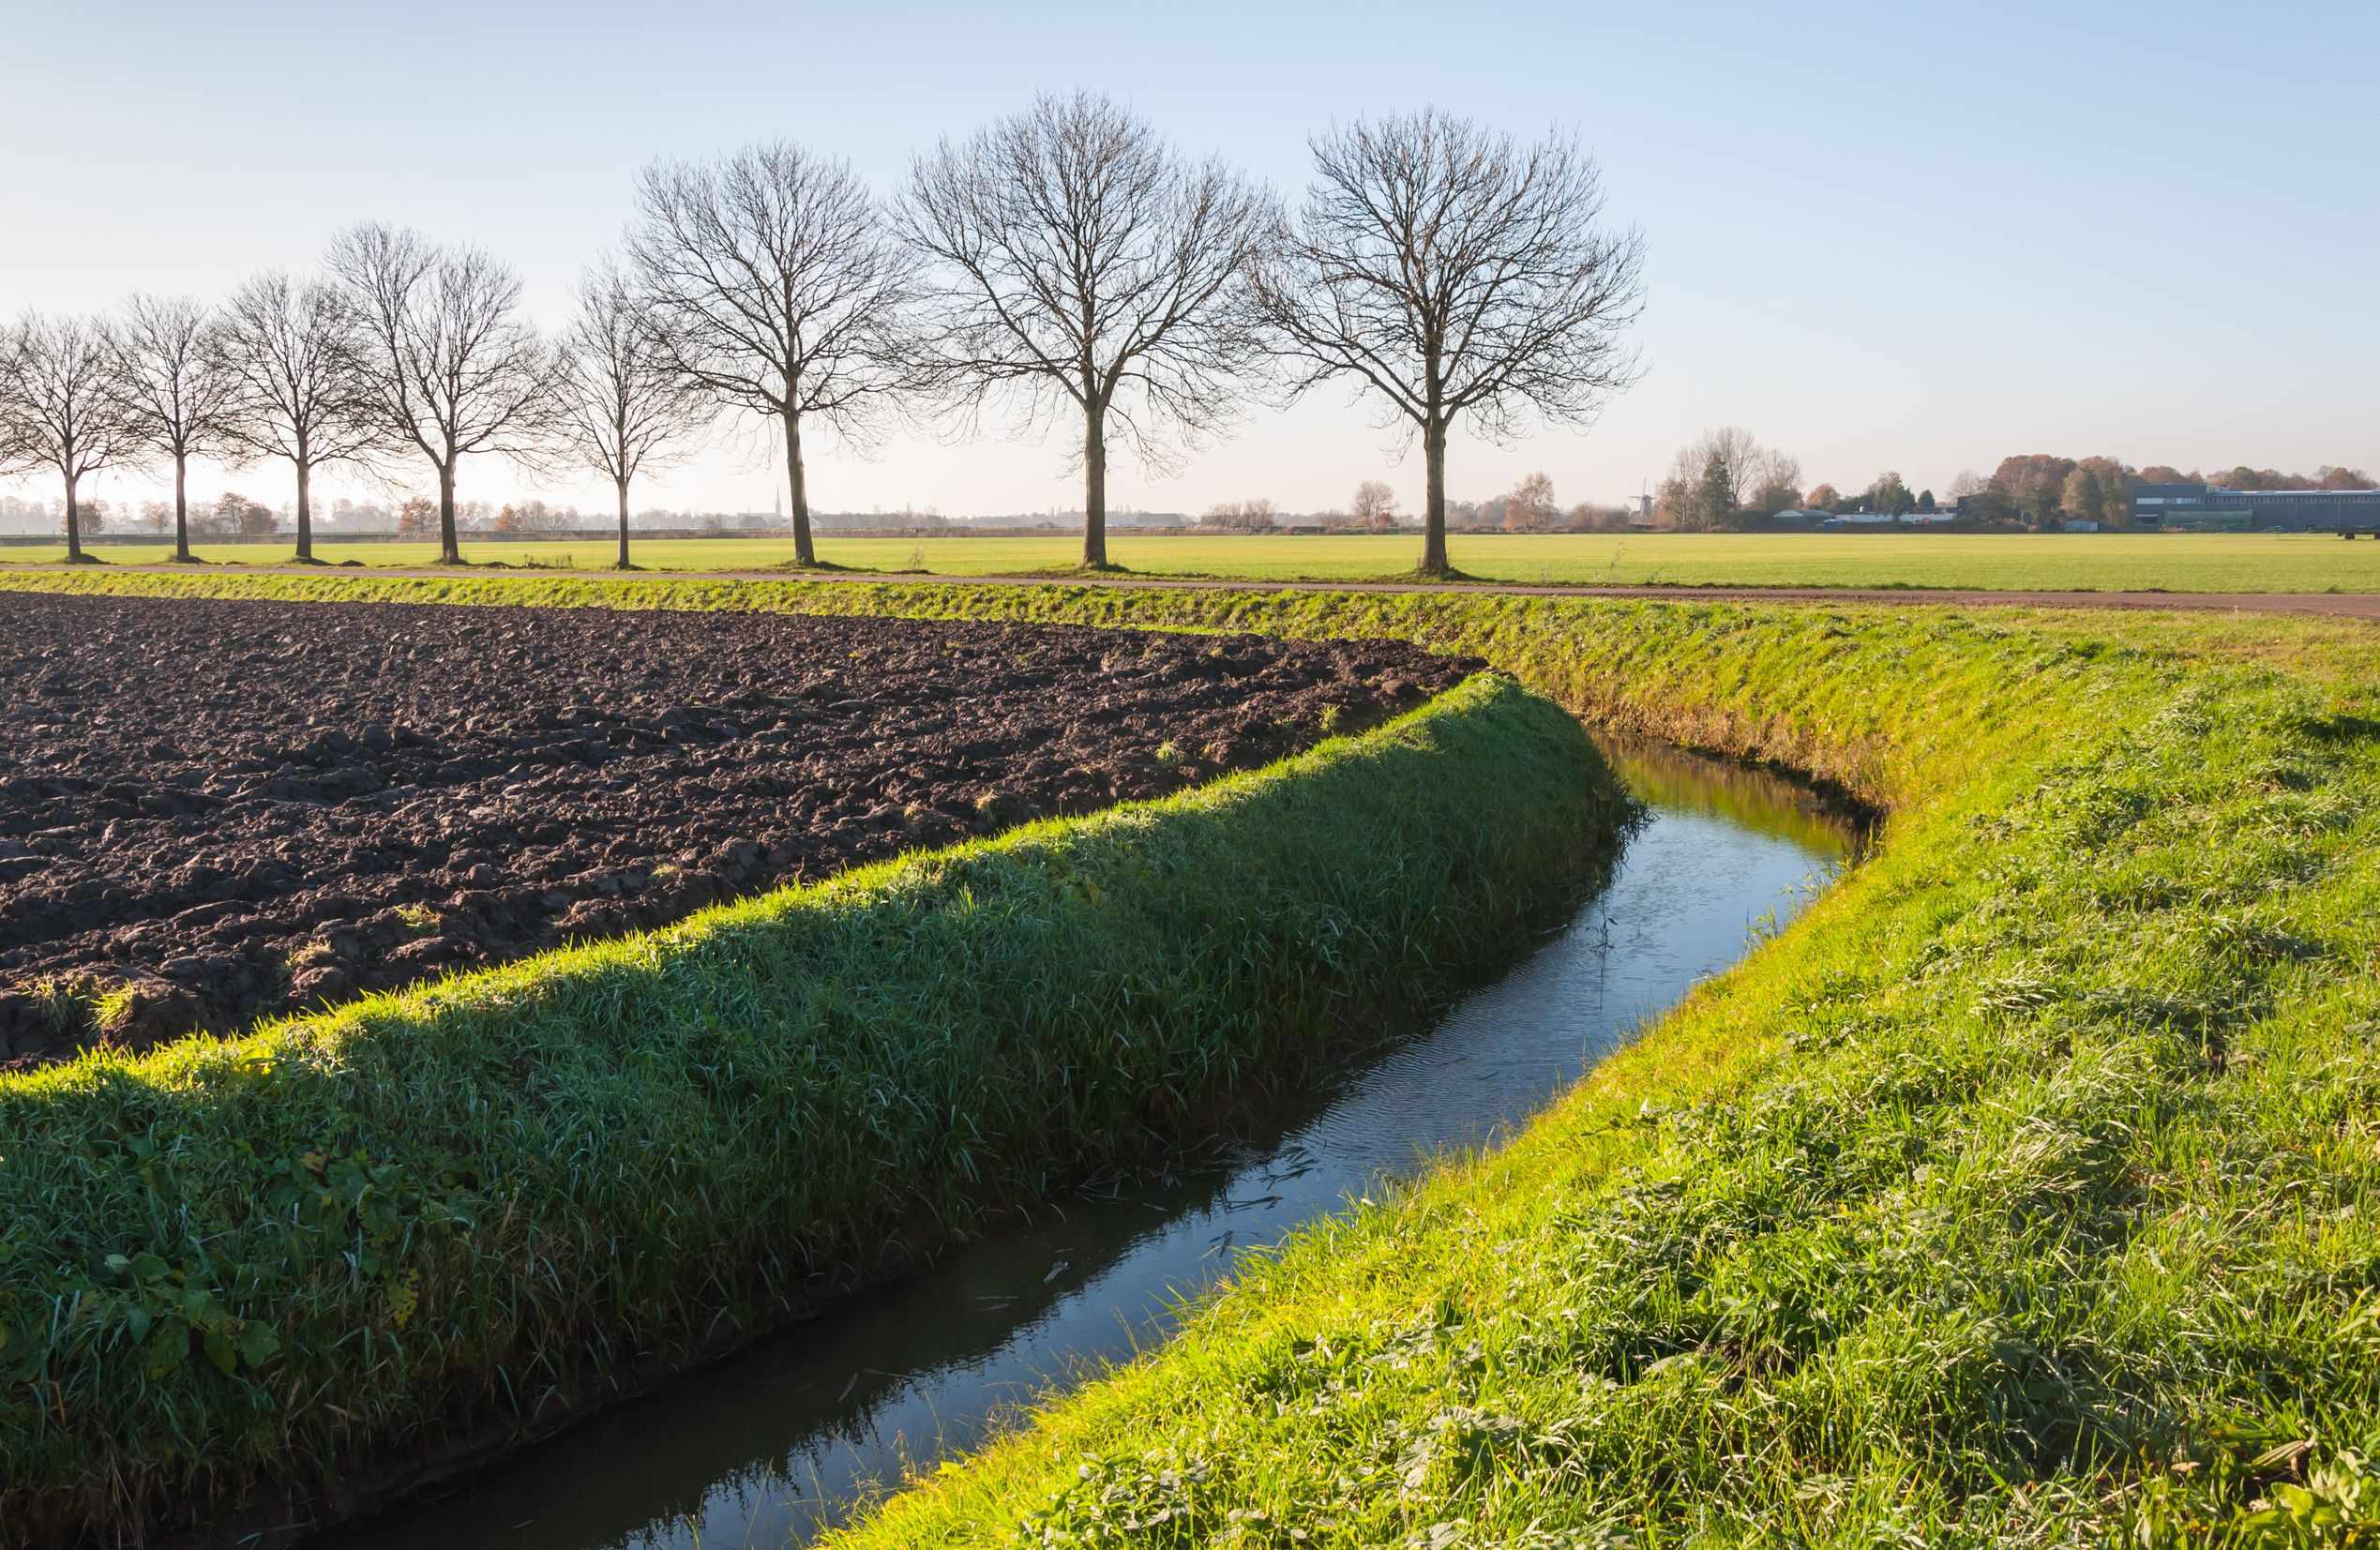 Typical tree-lined fields and canals in the Netherlands. Copyright: rmorijn with 123RF Stock Photo.